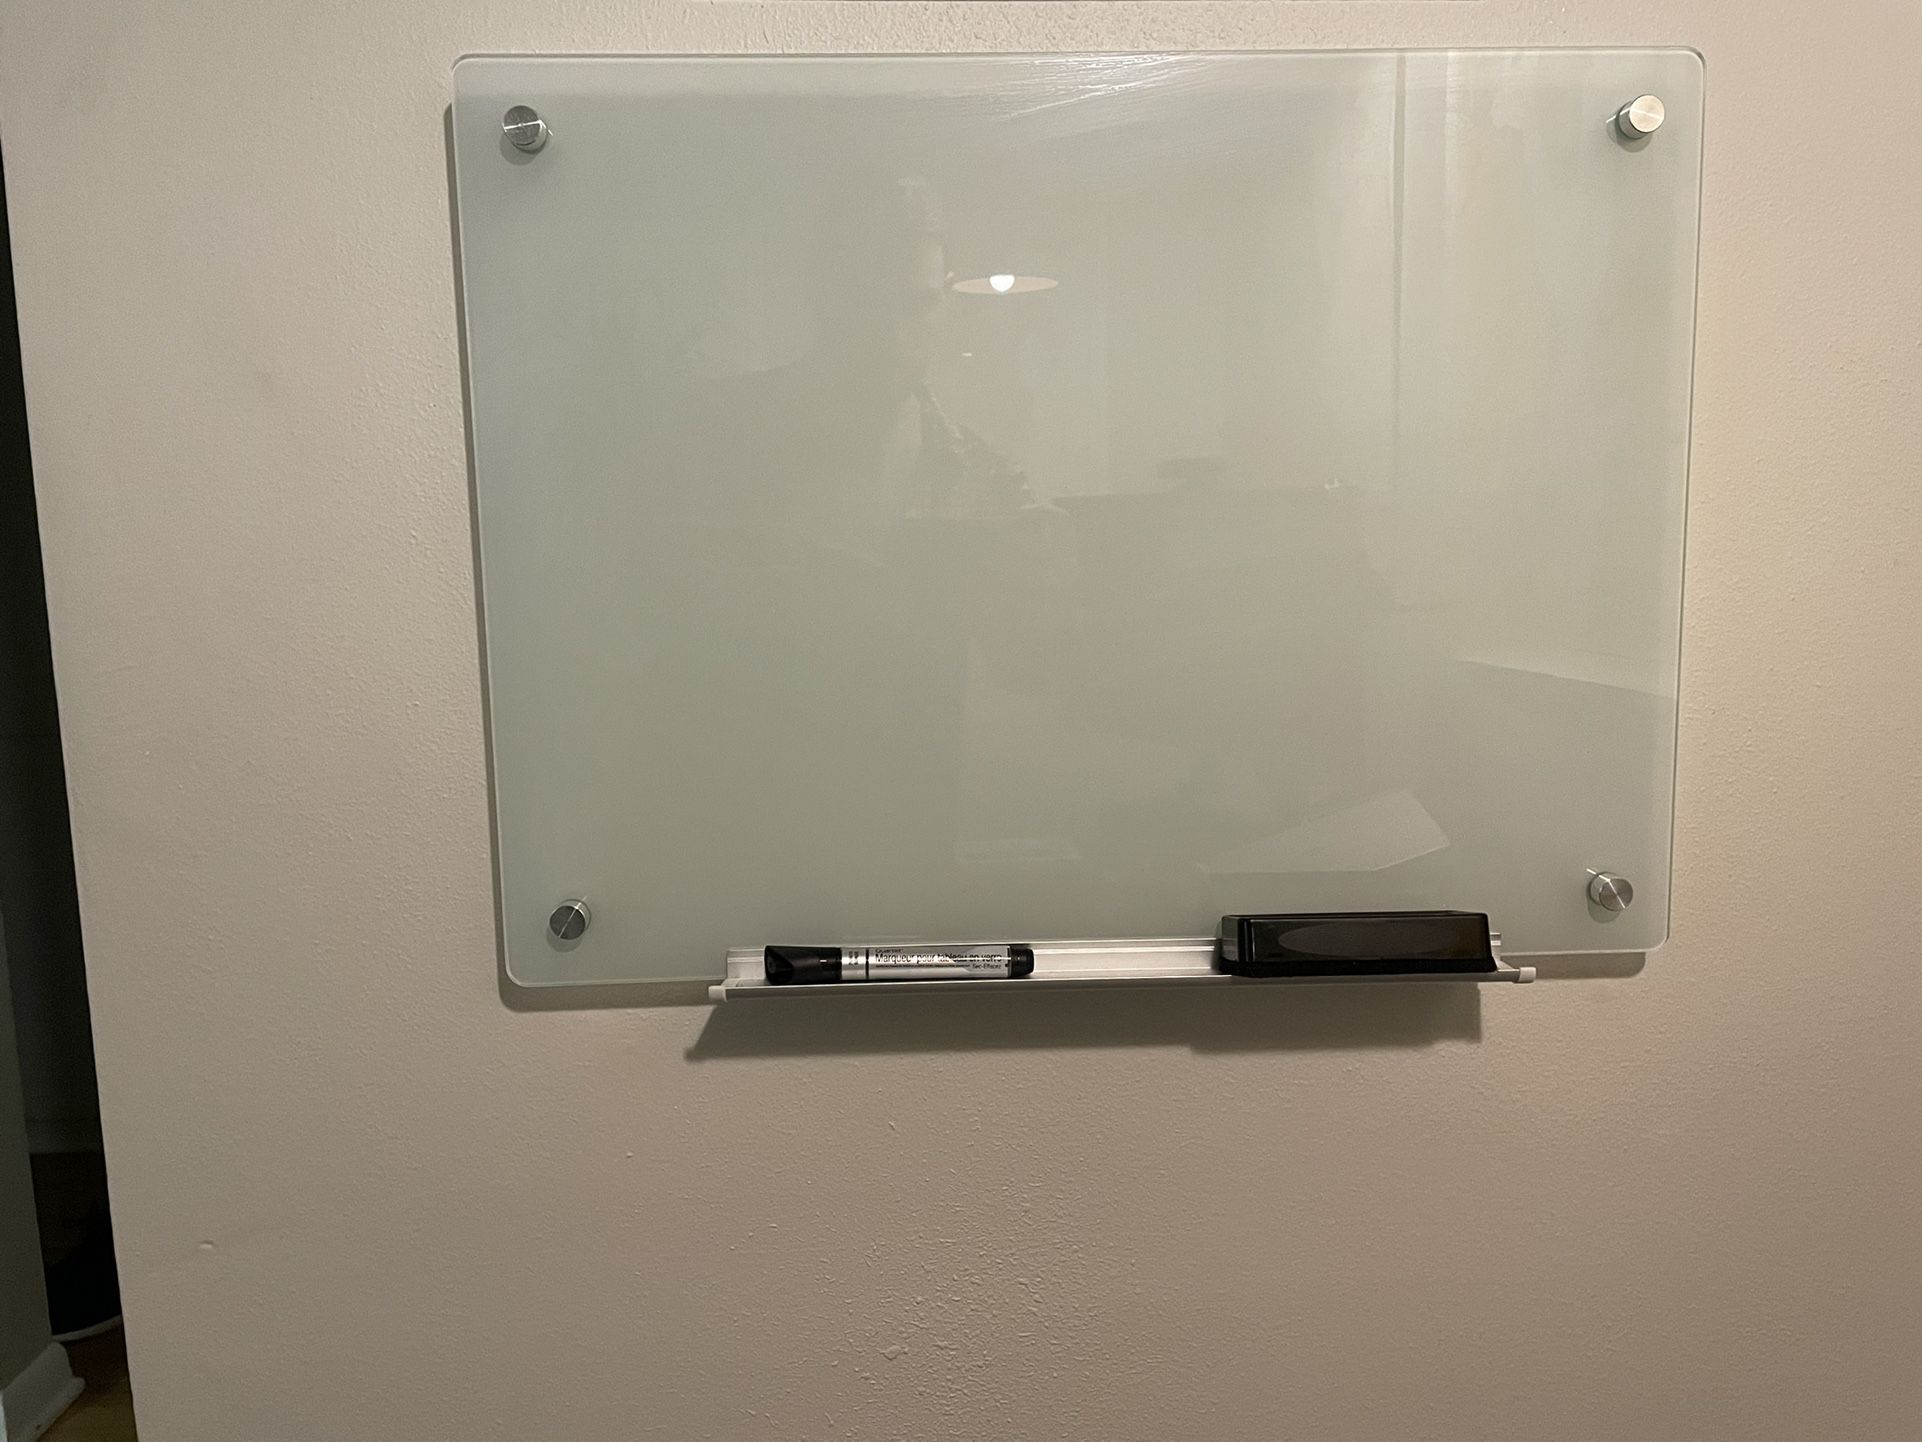 Frosted Glass Dry-Erase Board Set - 2' x 1.5' - Includes Hardware & Marker Tray (Non-Magnetic)